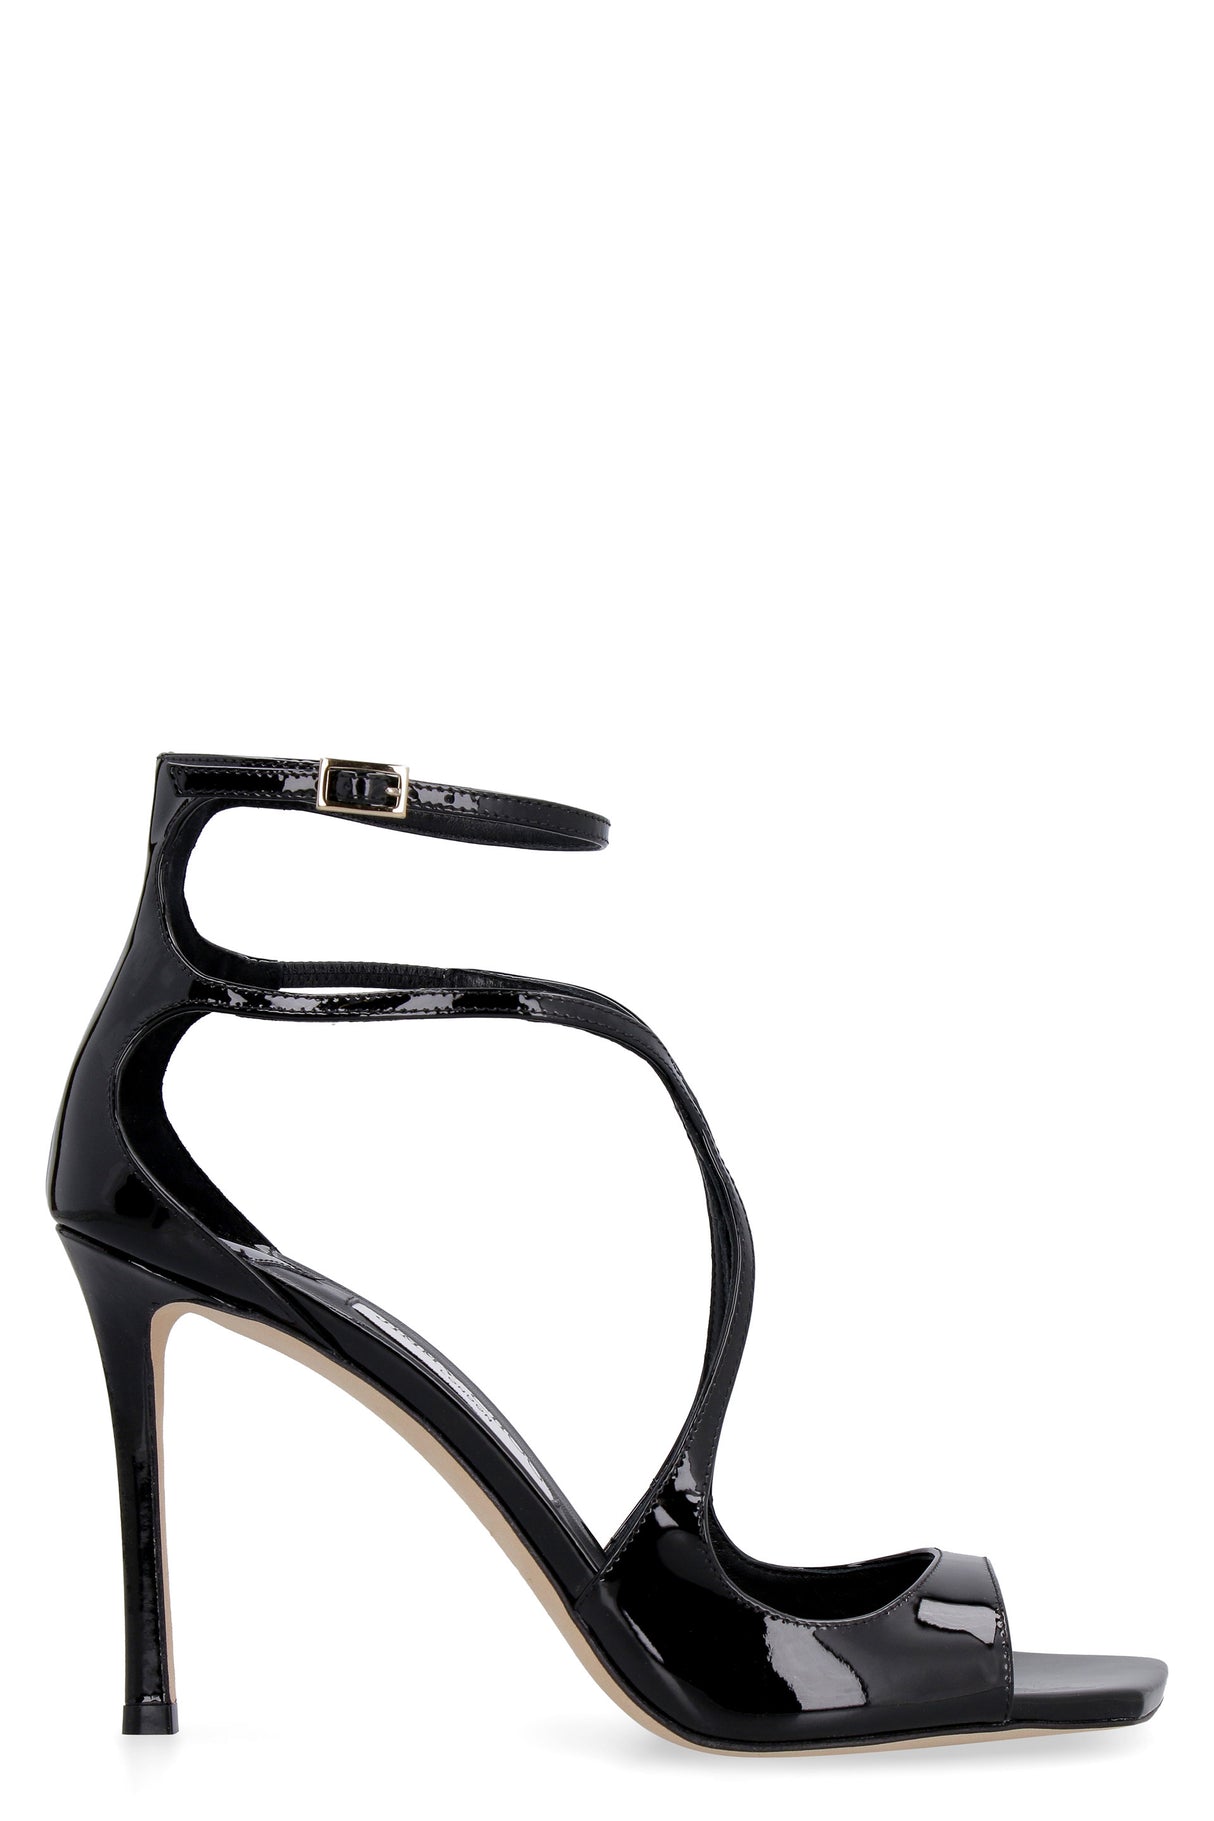 JIMMY CHOO Black Patent Leather Pumps for Women in FW23 Collection